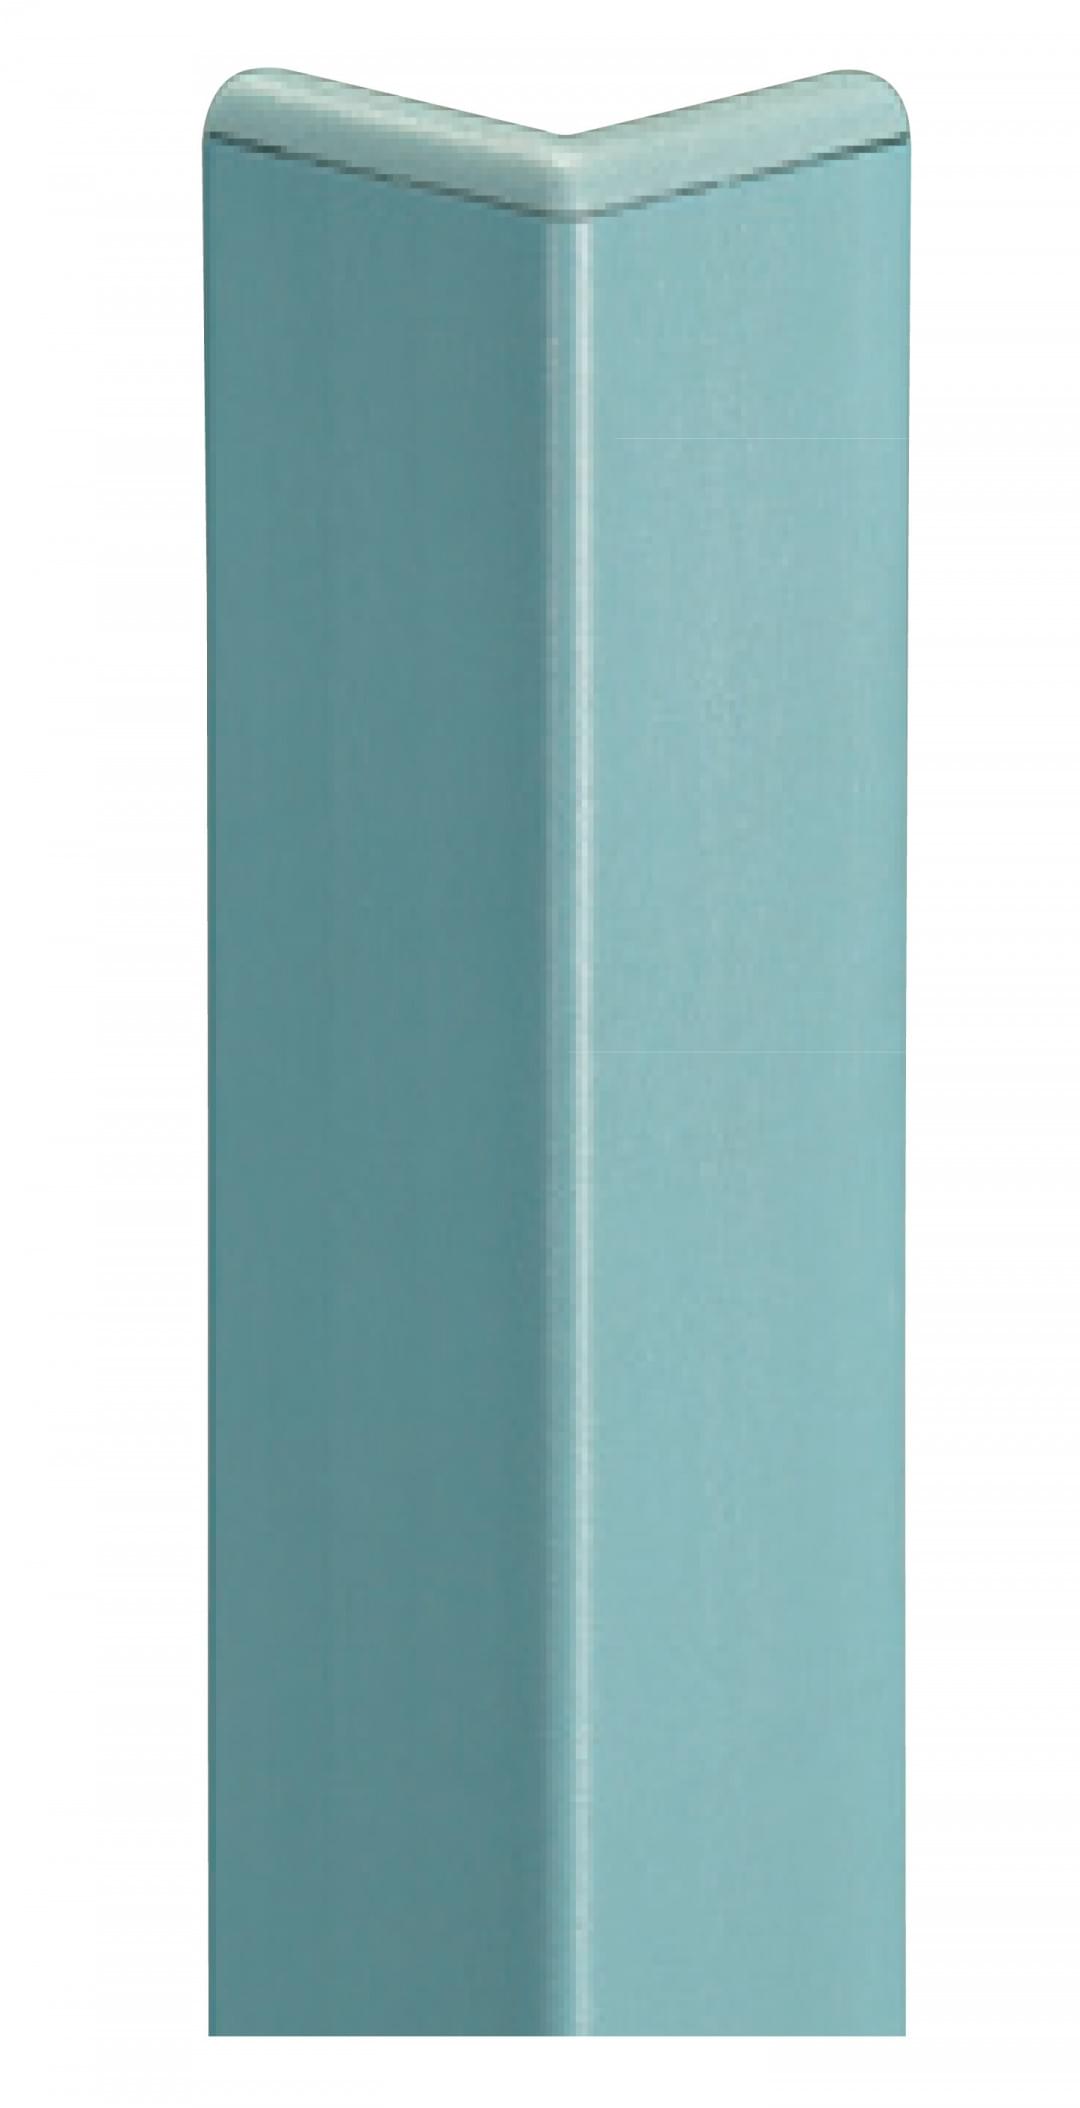 CGD-75 BLUE (w: 75x75mm) from Haema